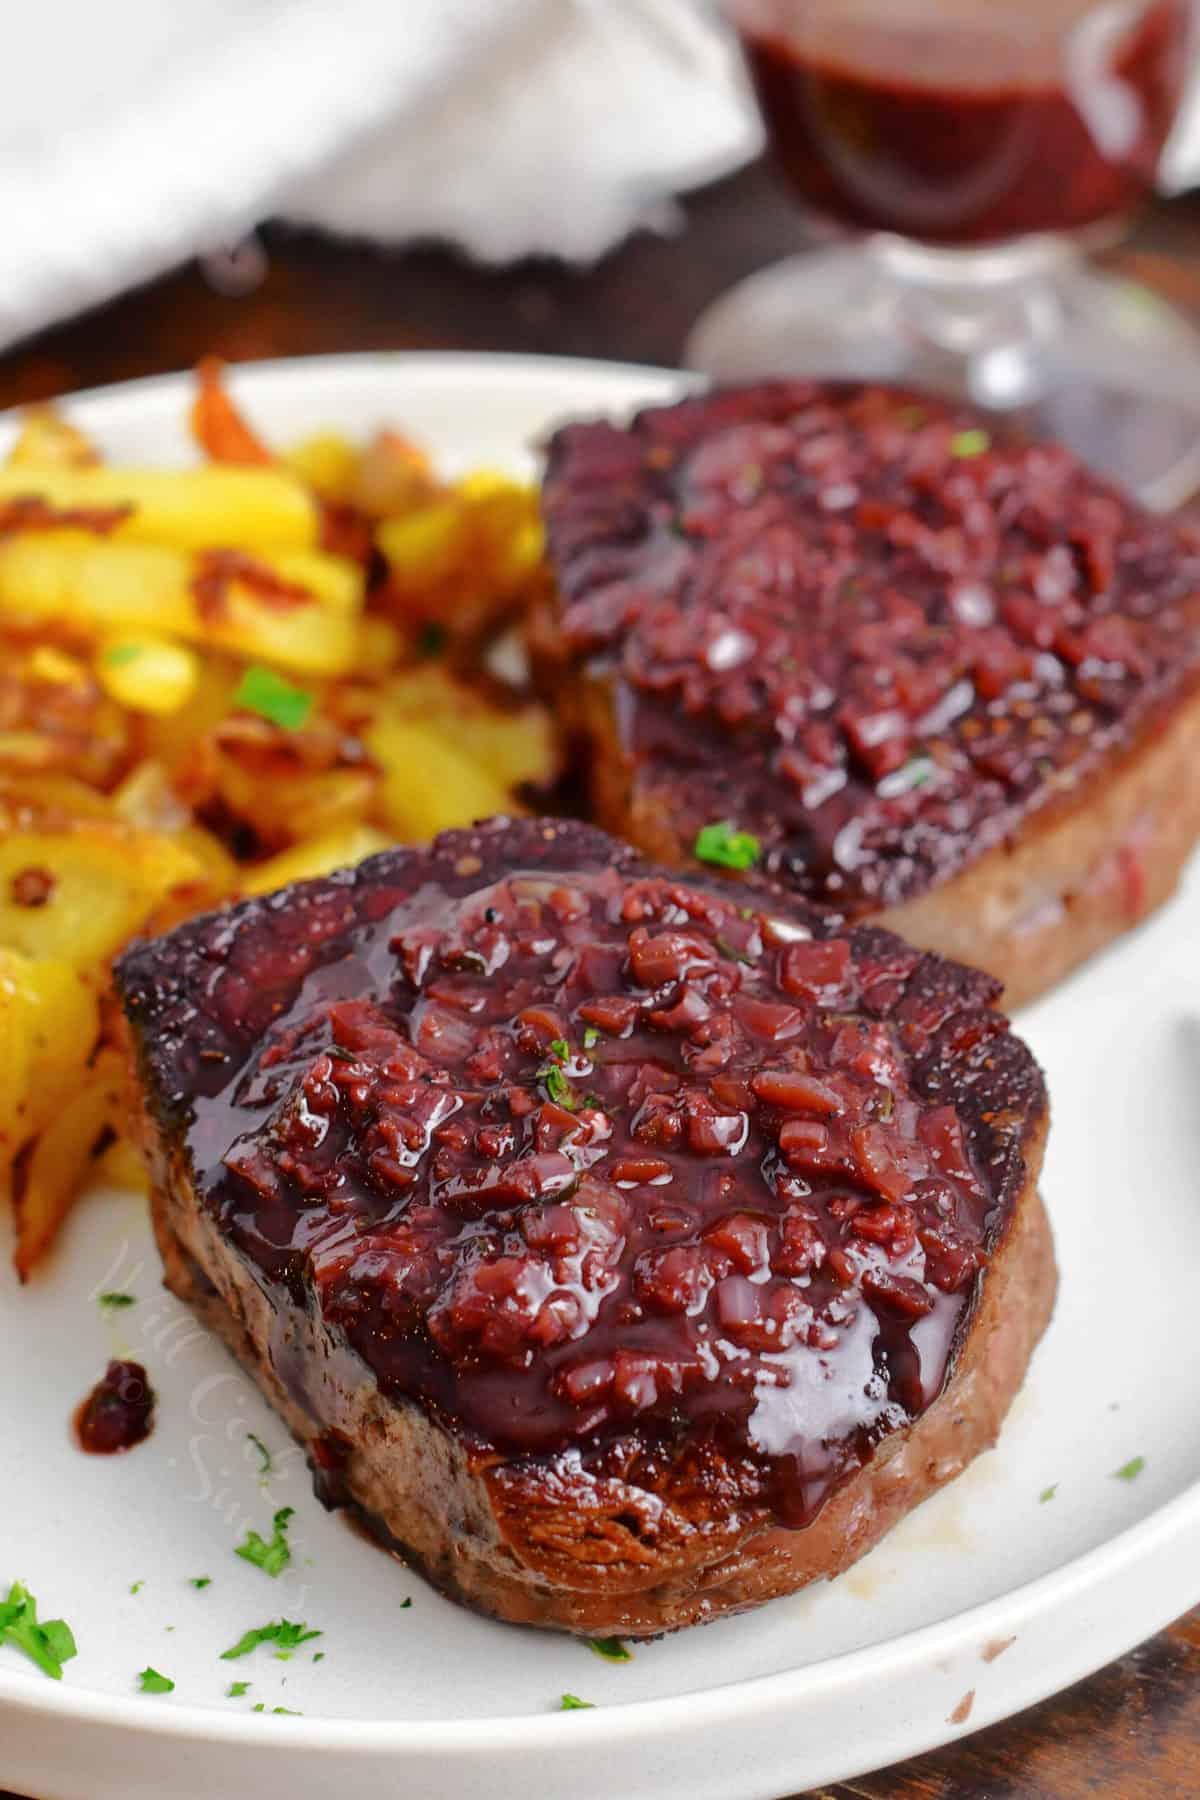 Steaks with red wine steak sauce on a plate